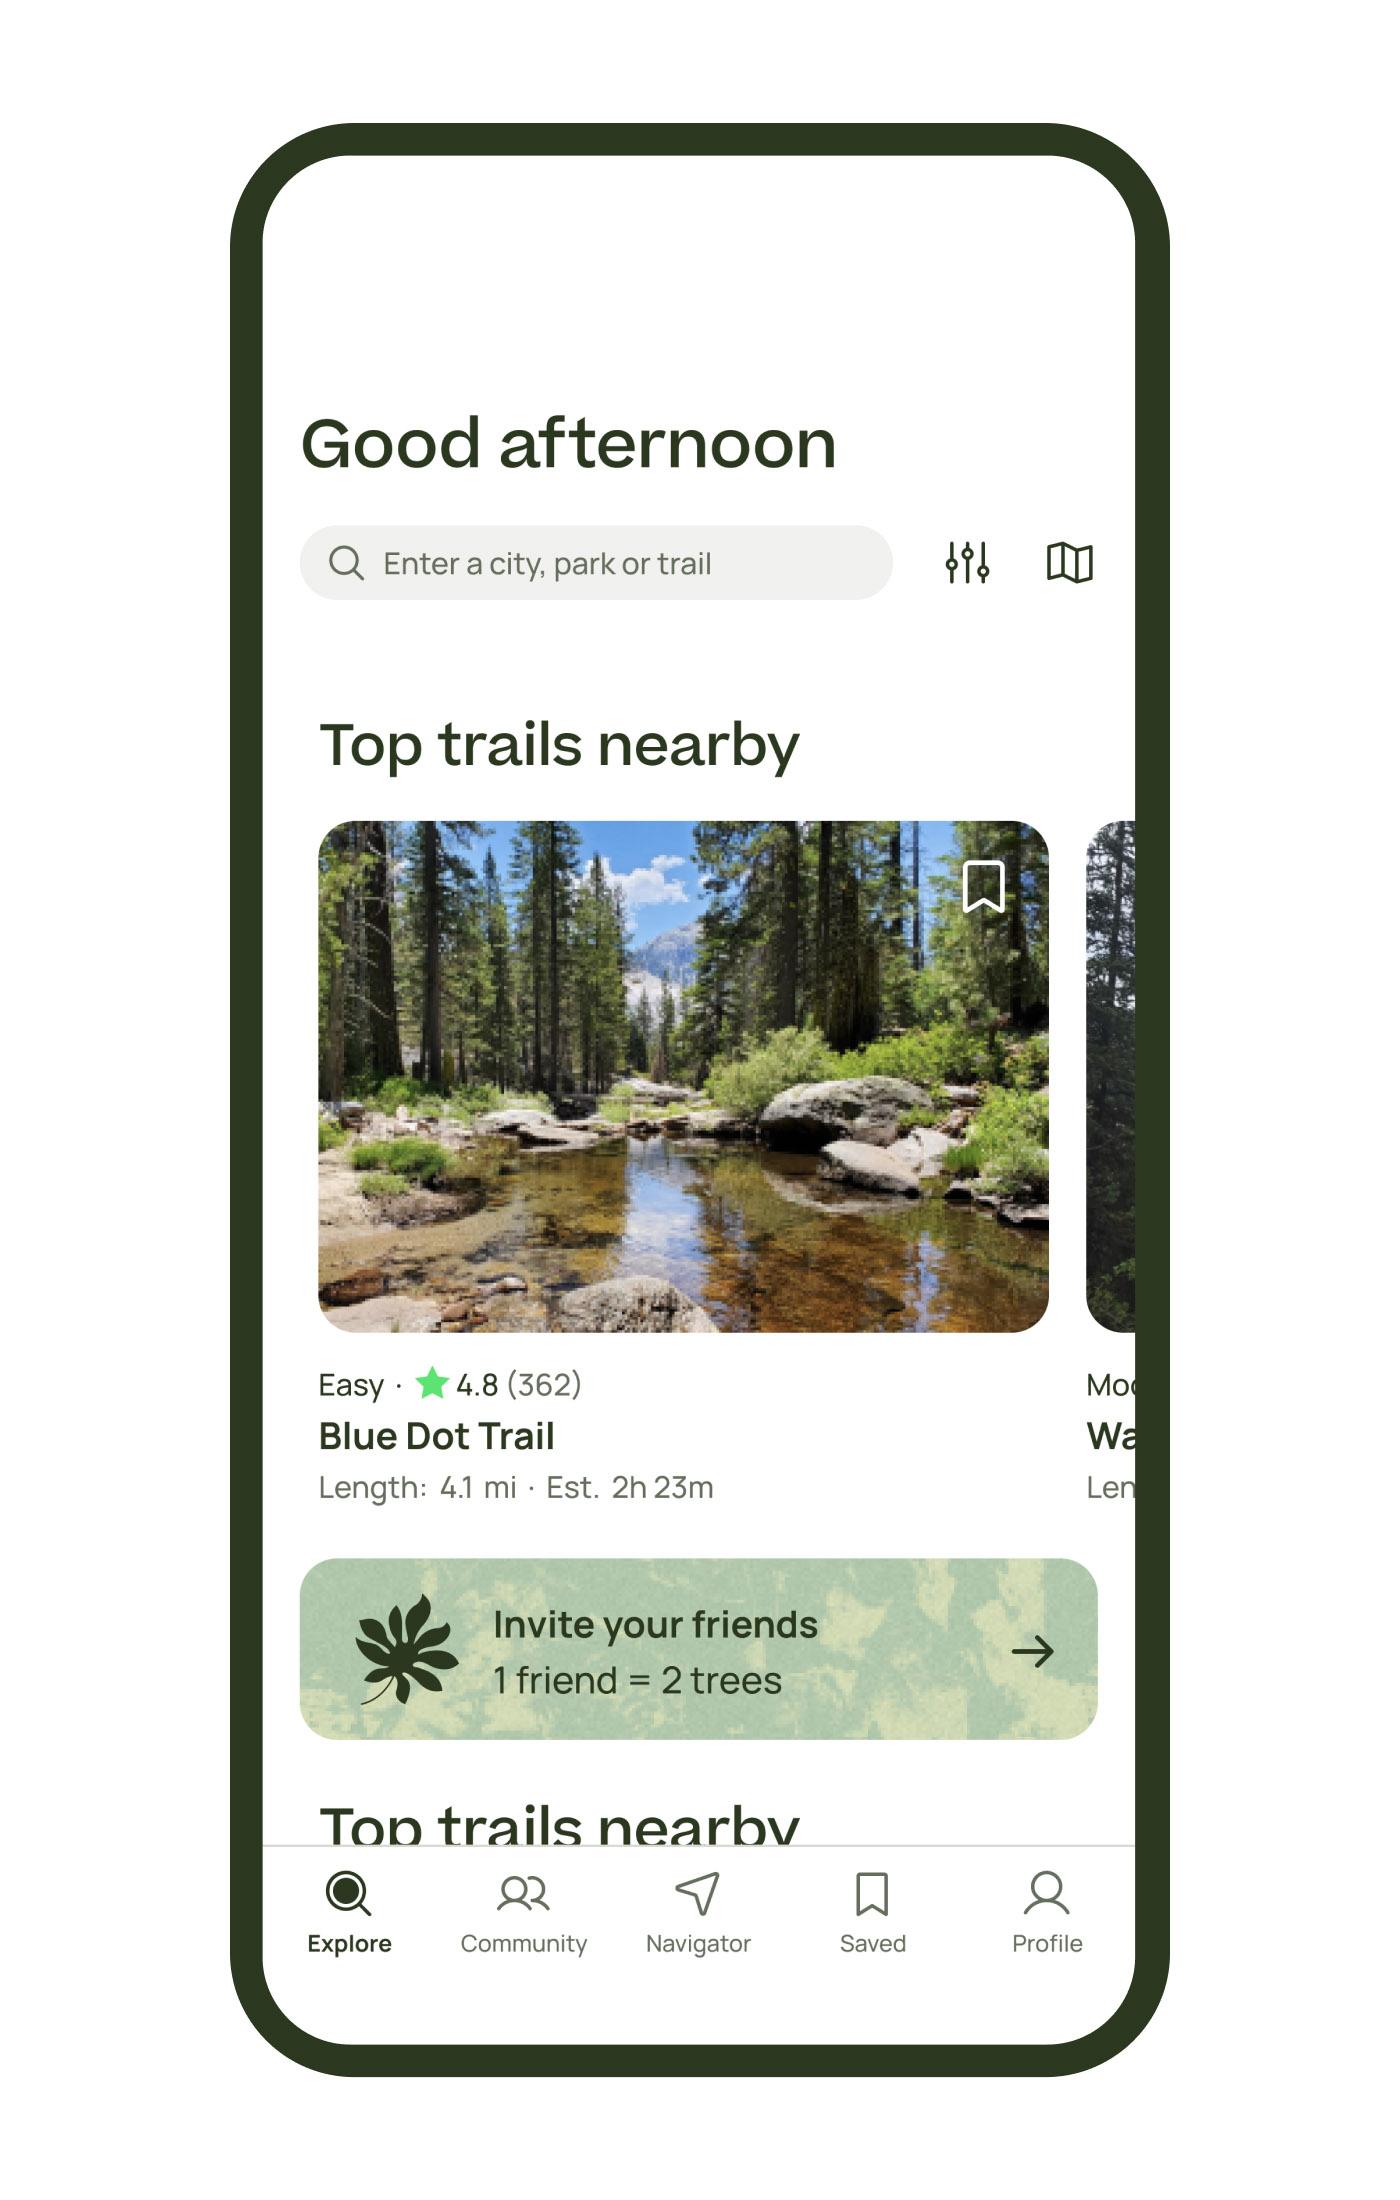 All Trails has rebranded and aims to inspire and motivate users to spend more time in nature / AllTrails